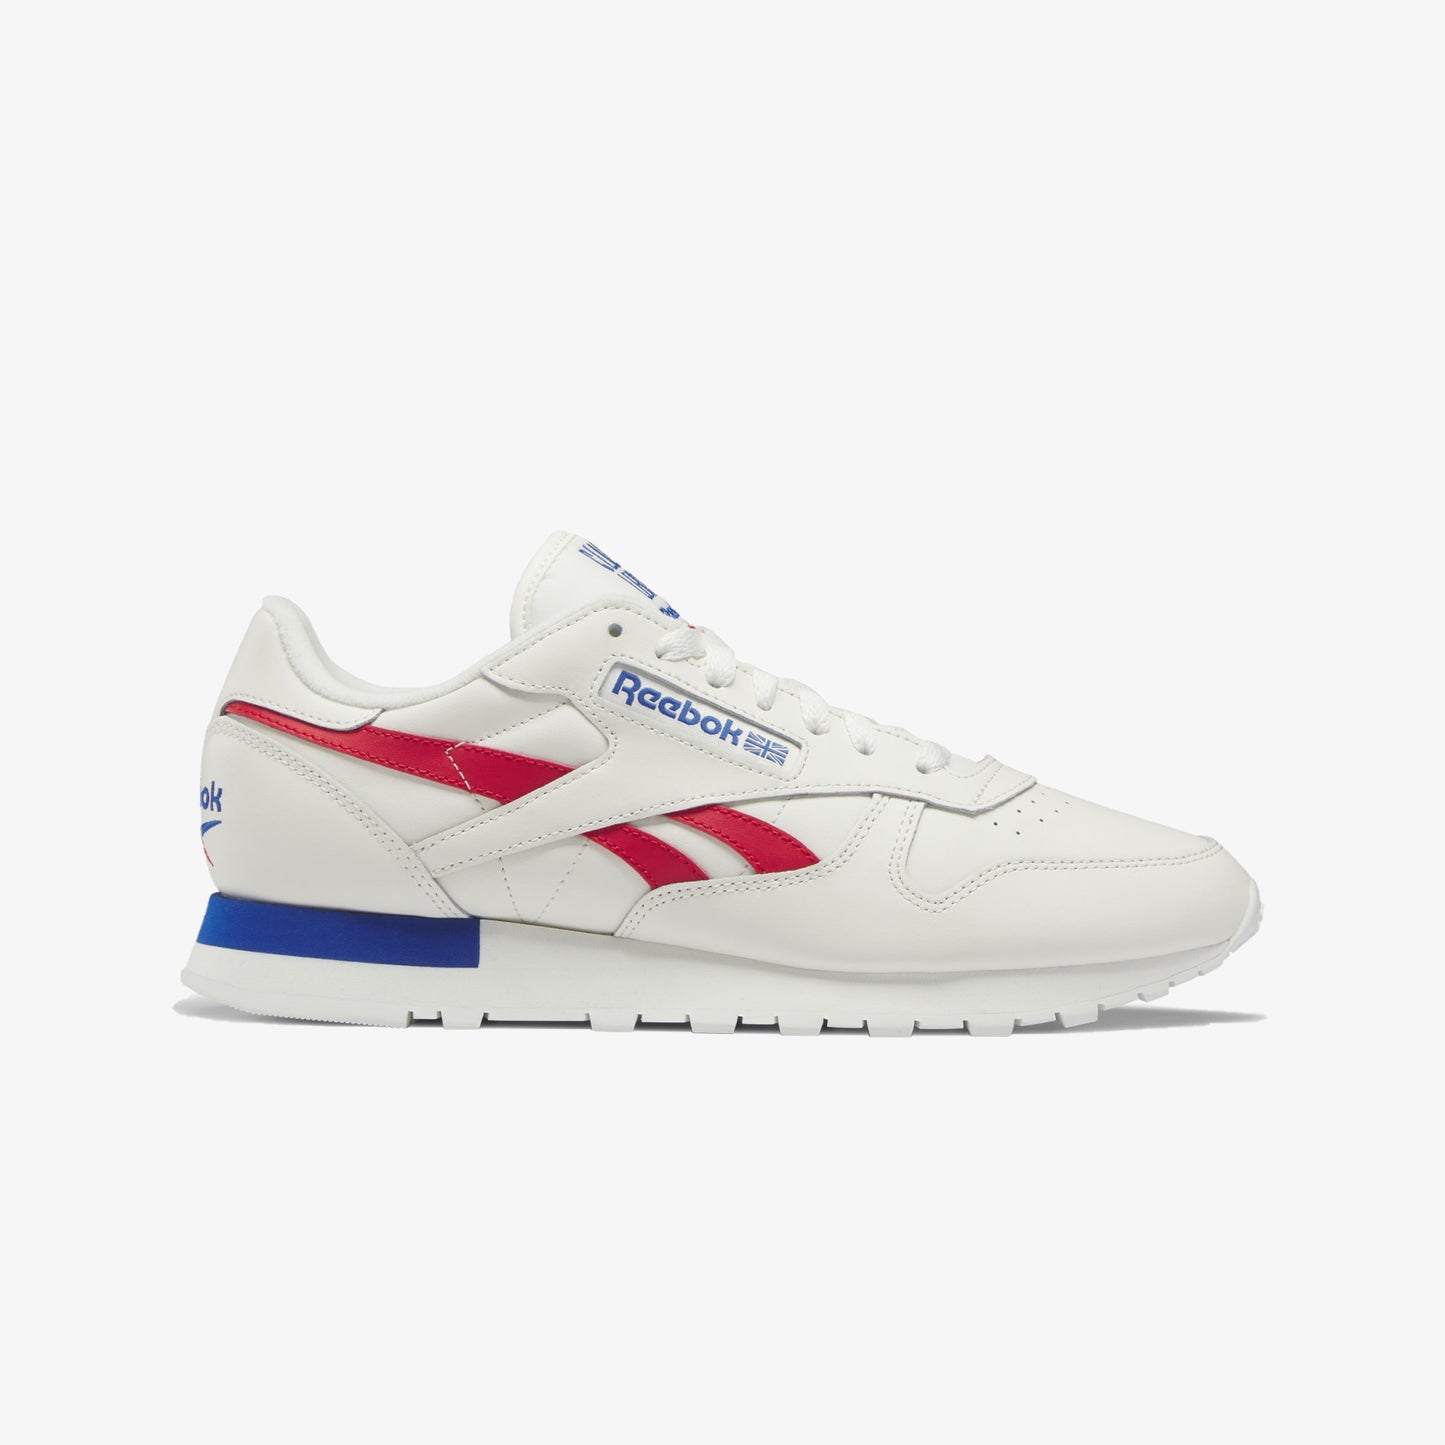 CLASSIC LEATHER 'VECTOR RED/VECTOR BLUE/WHITE'